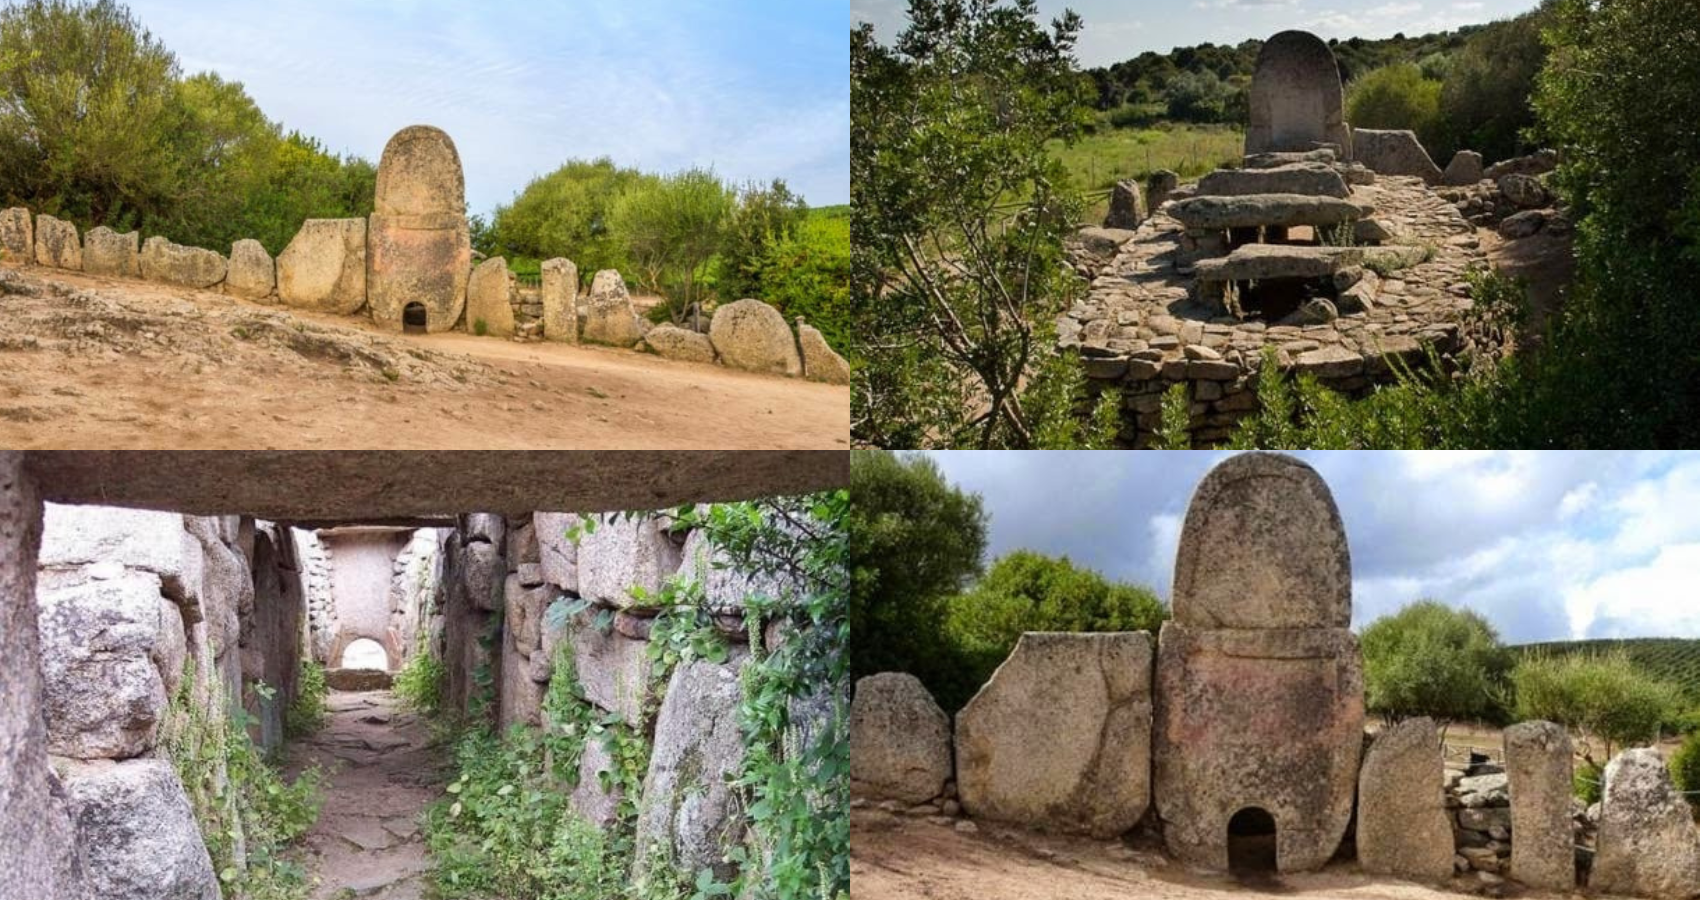 The Coddu Vecchiu Megalithic Tombs Of Giants